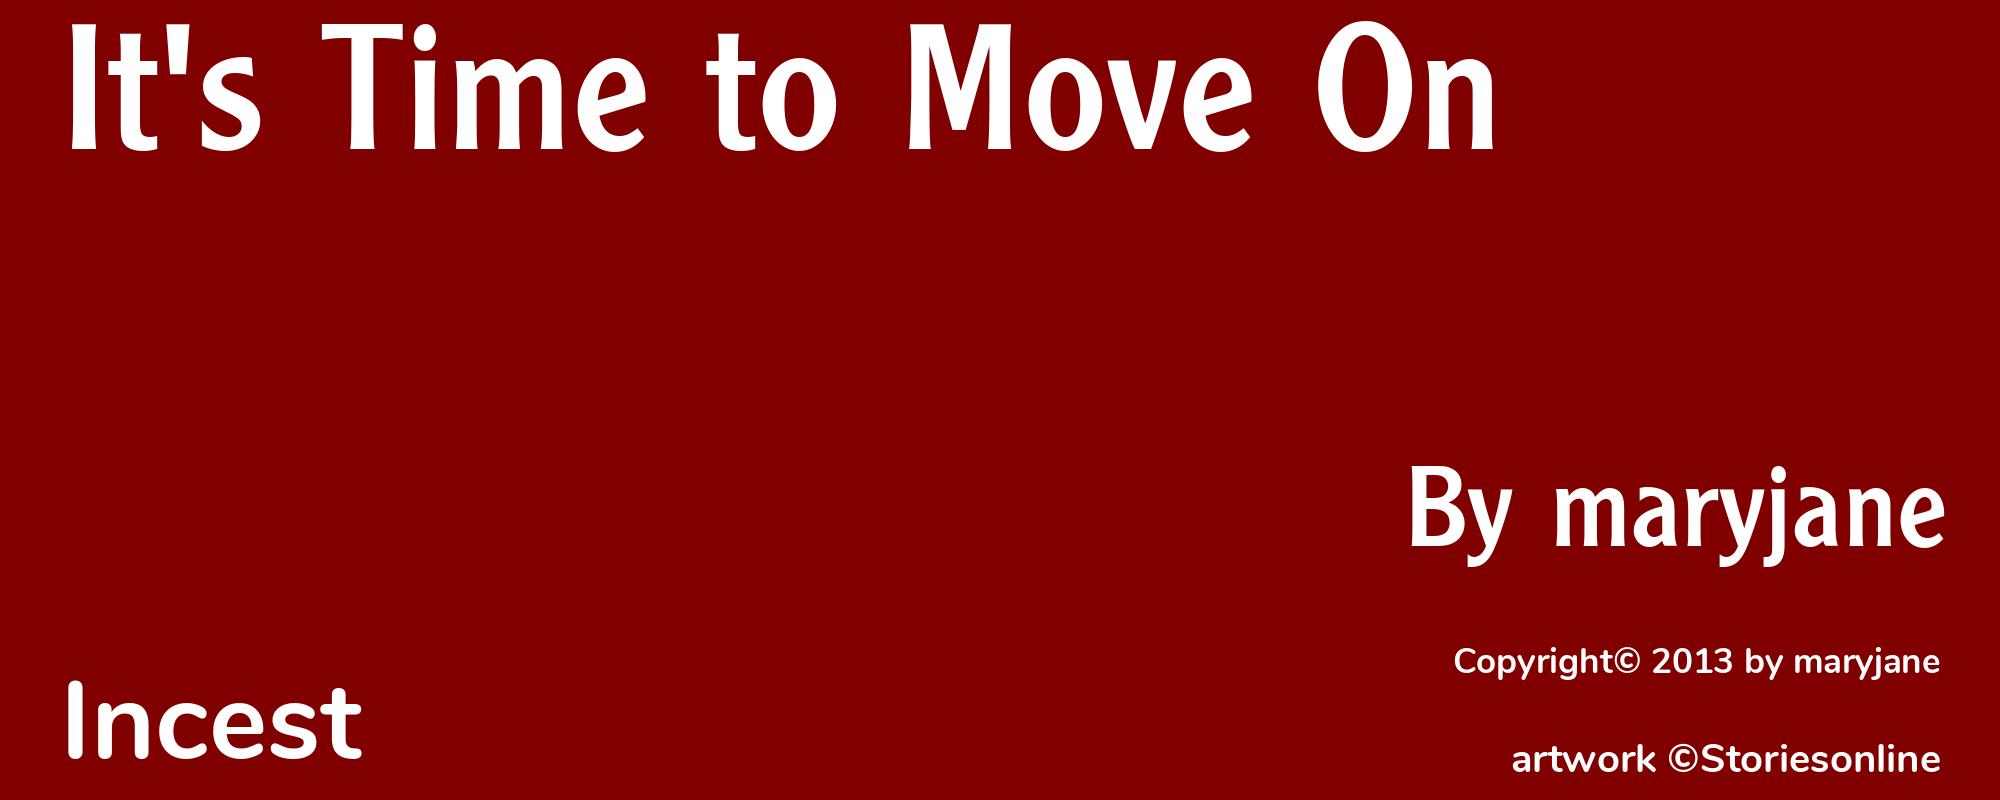 It's Time to Move On - Cover